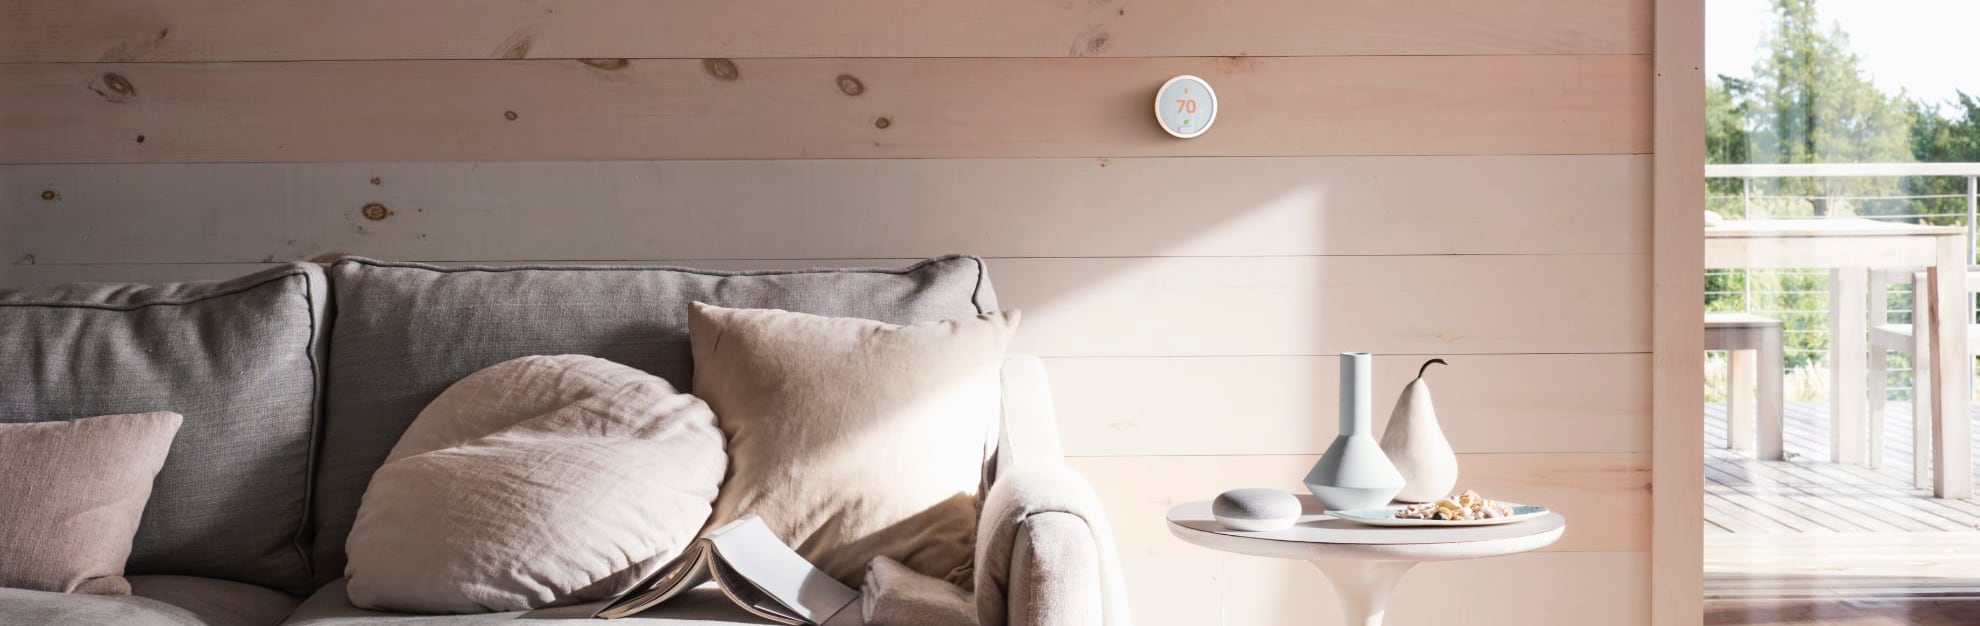 Vivint Home Automation in Lynchburg